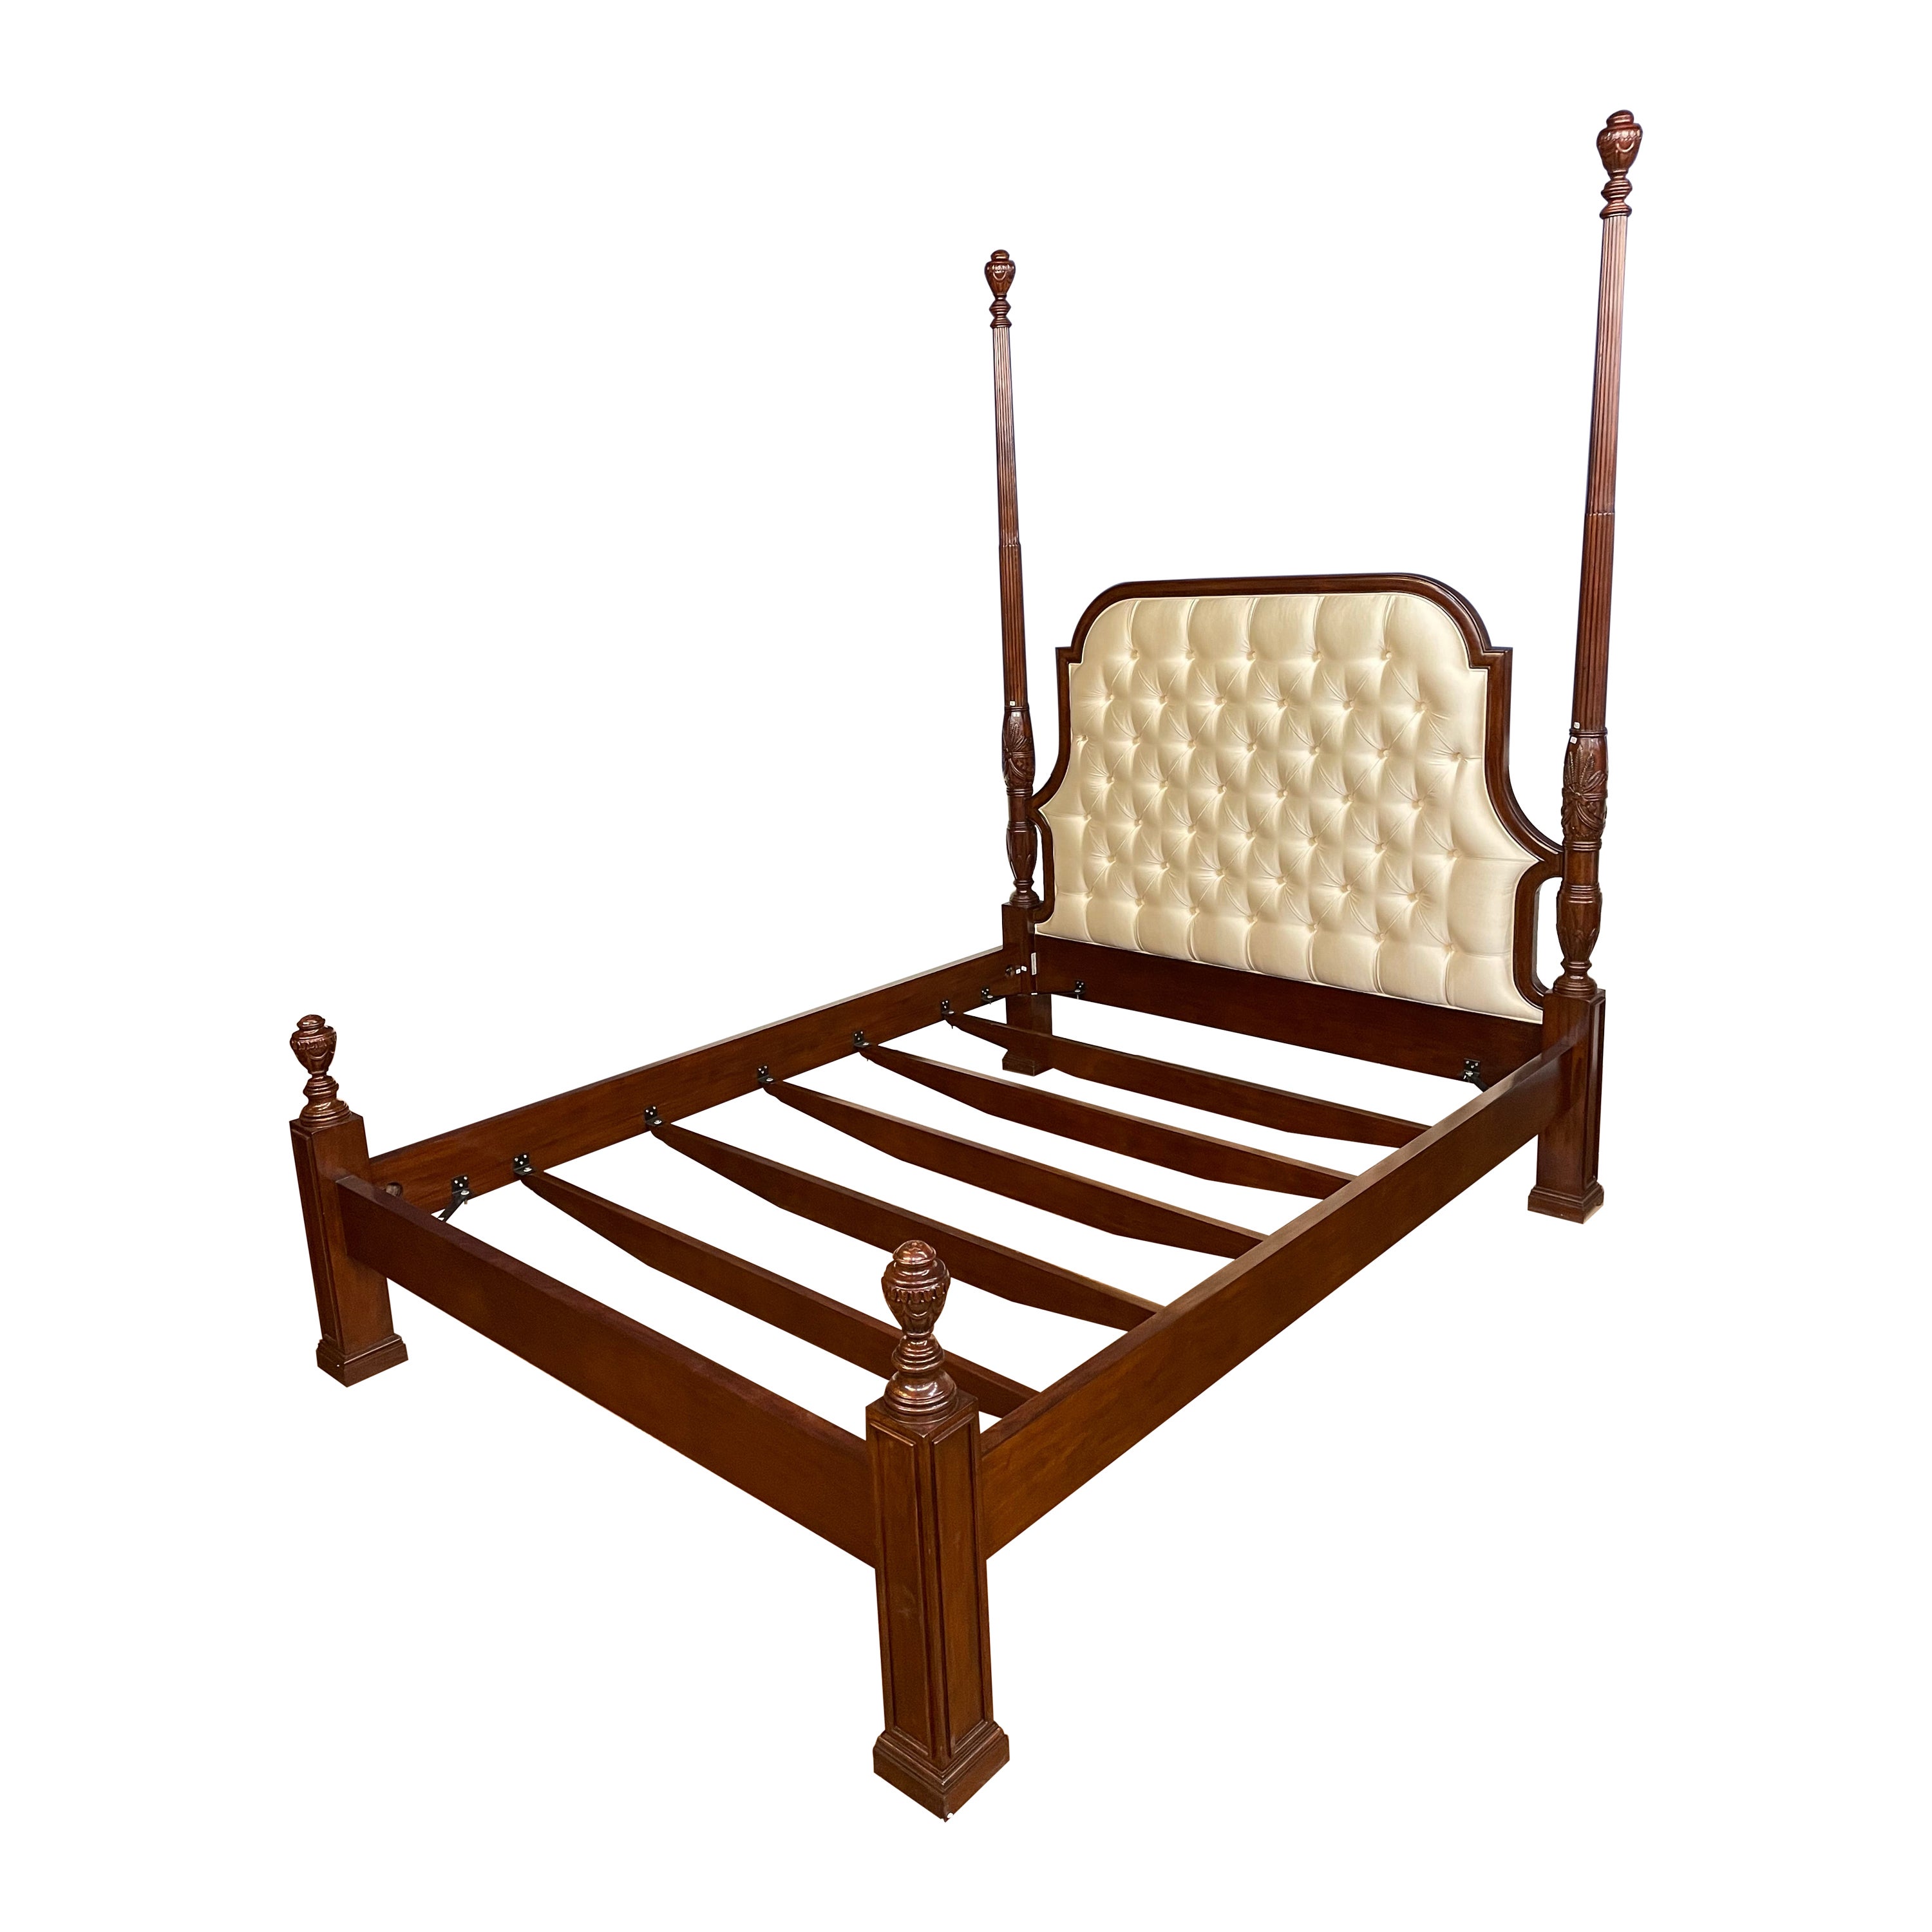 Scarborough House Queen Size Upholstered Mahogany Two Post Bed - Showroom Sample For Sale